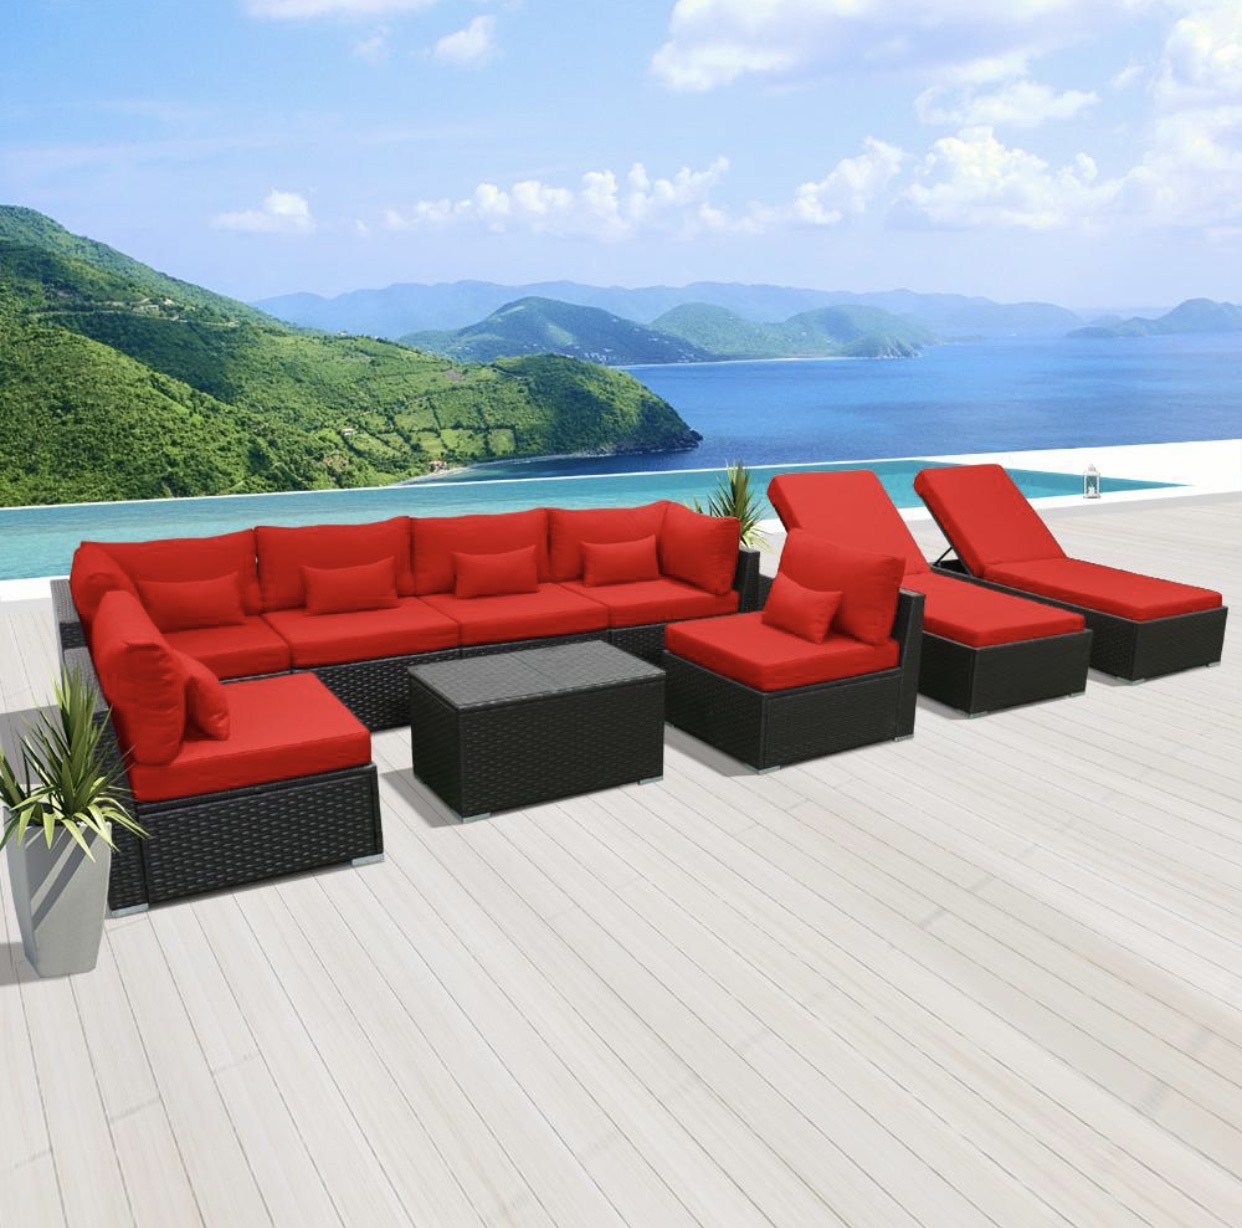 Crimson Red 7G2A Replacement Cushion Cover Outdoor Patio Wicker Sofa Furniture Set (Without Foam Insis)